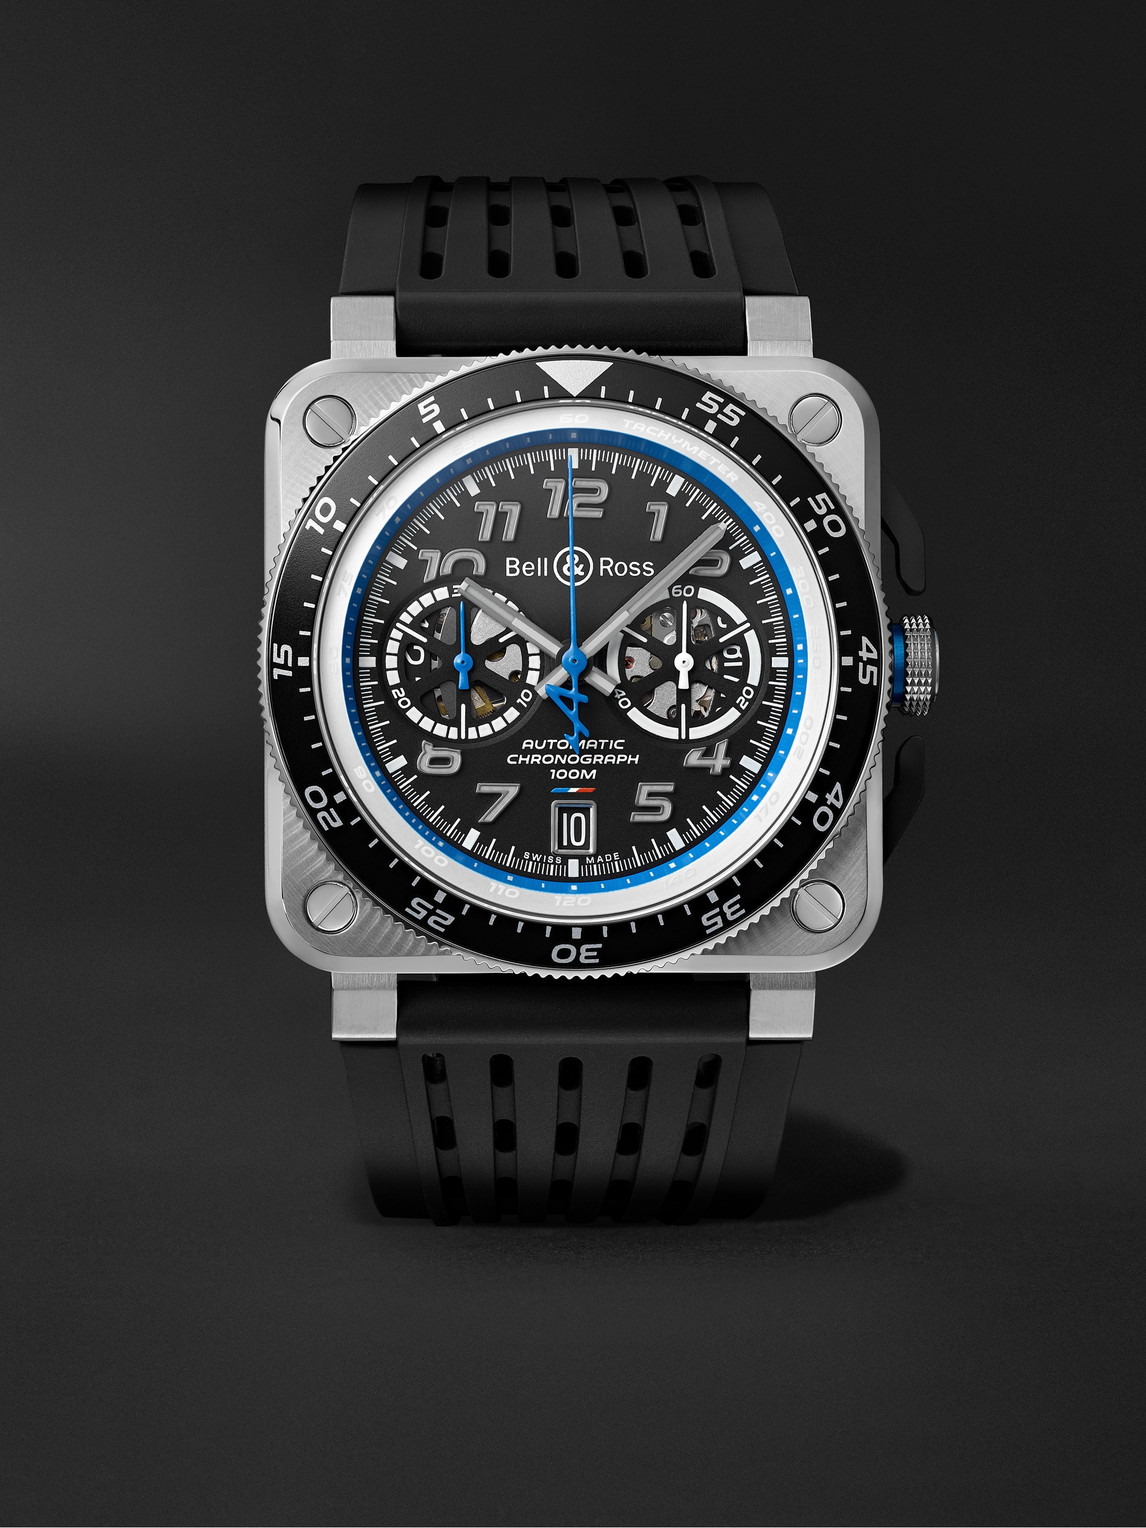 Alpine F1 Team BR 03-94 Limited Edition Automatic Chronograph 42mm Stainless Steel and Rubber Watch, Ref. No. BR0394-A521/SRB